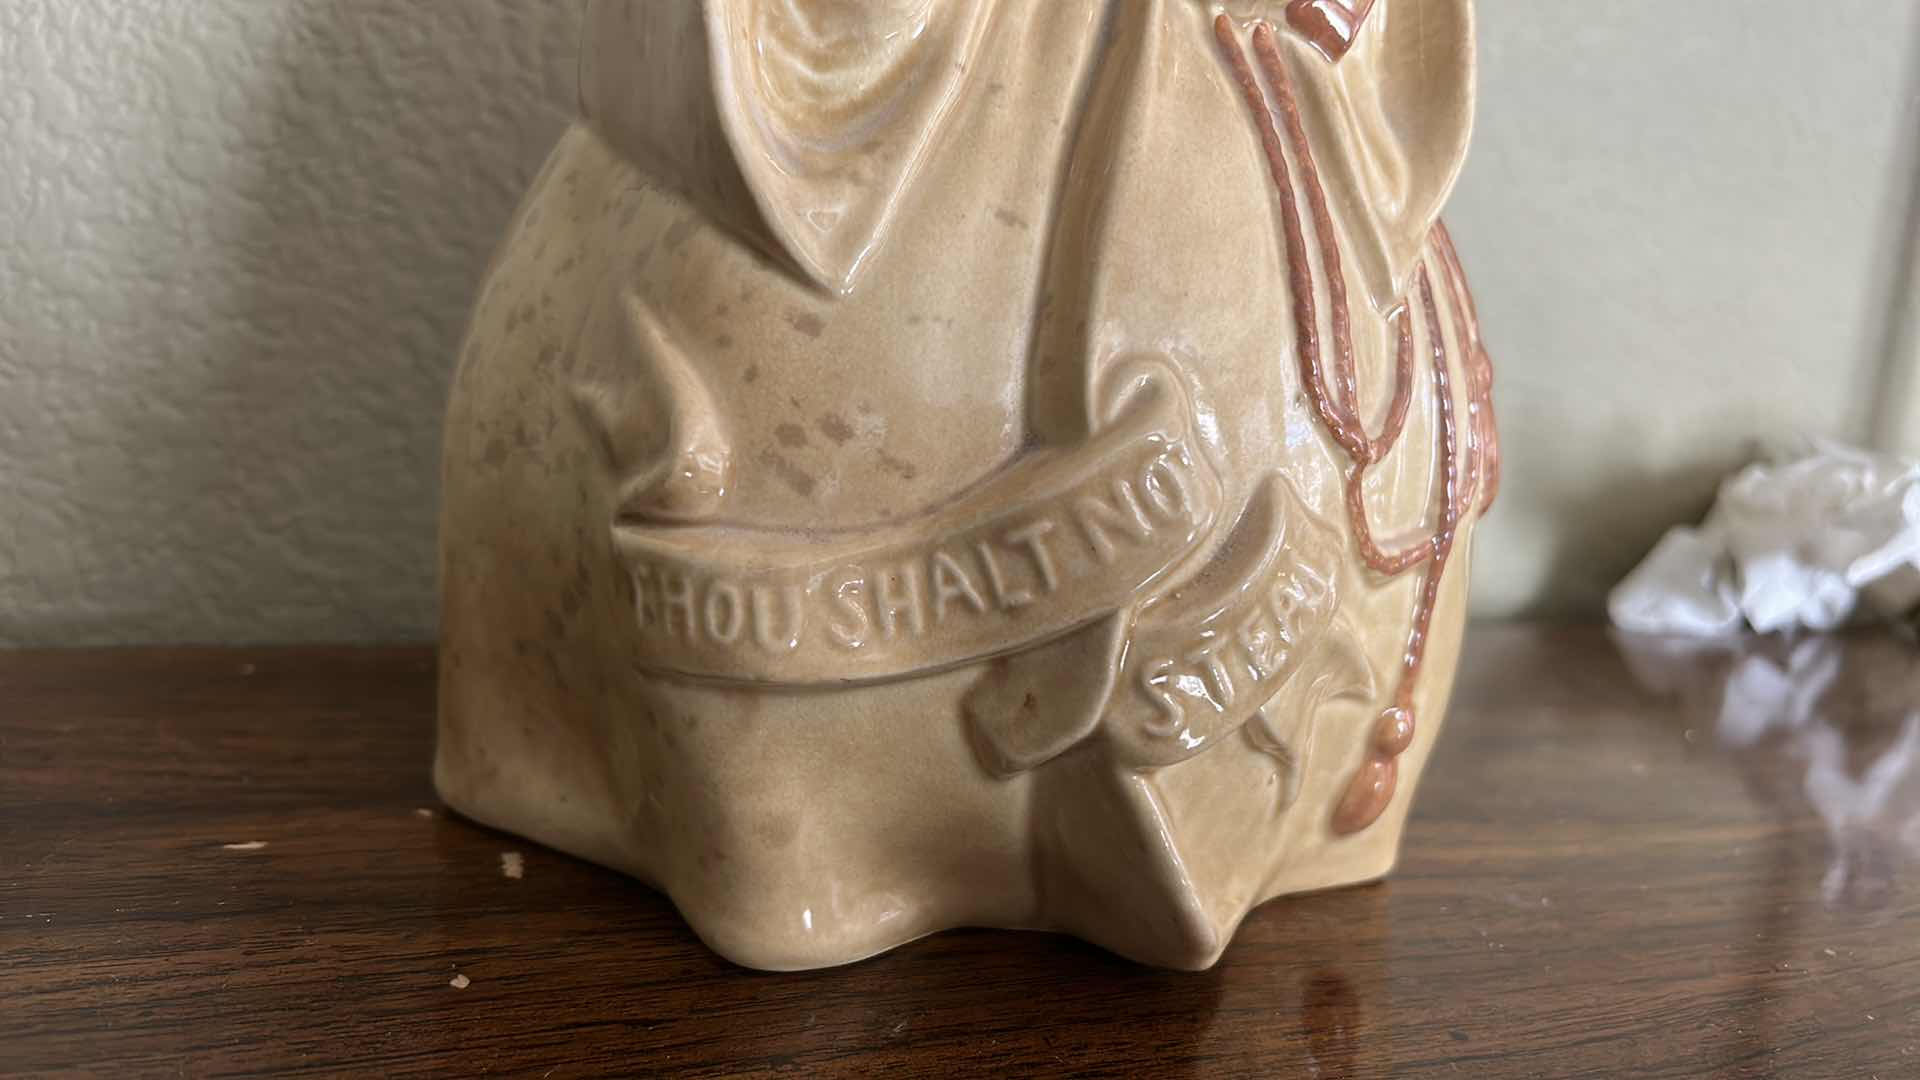 Photo 2 of VINTAGE 1940 HAND PAINTED “THOU SHALT NOT STEAL COOKIE JAR - RED WING POTTERY